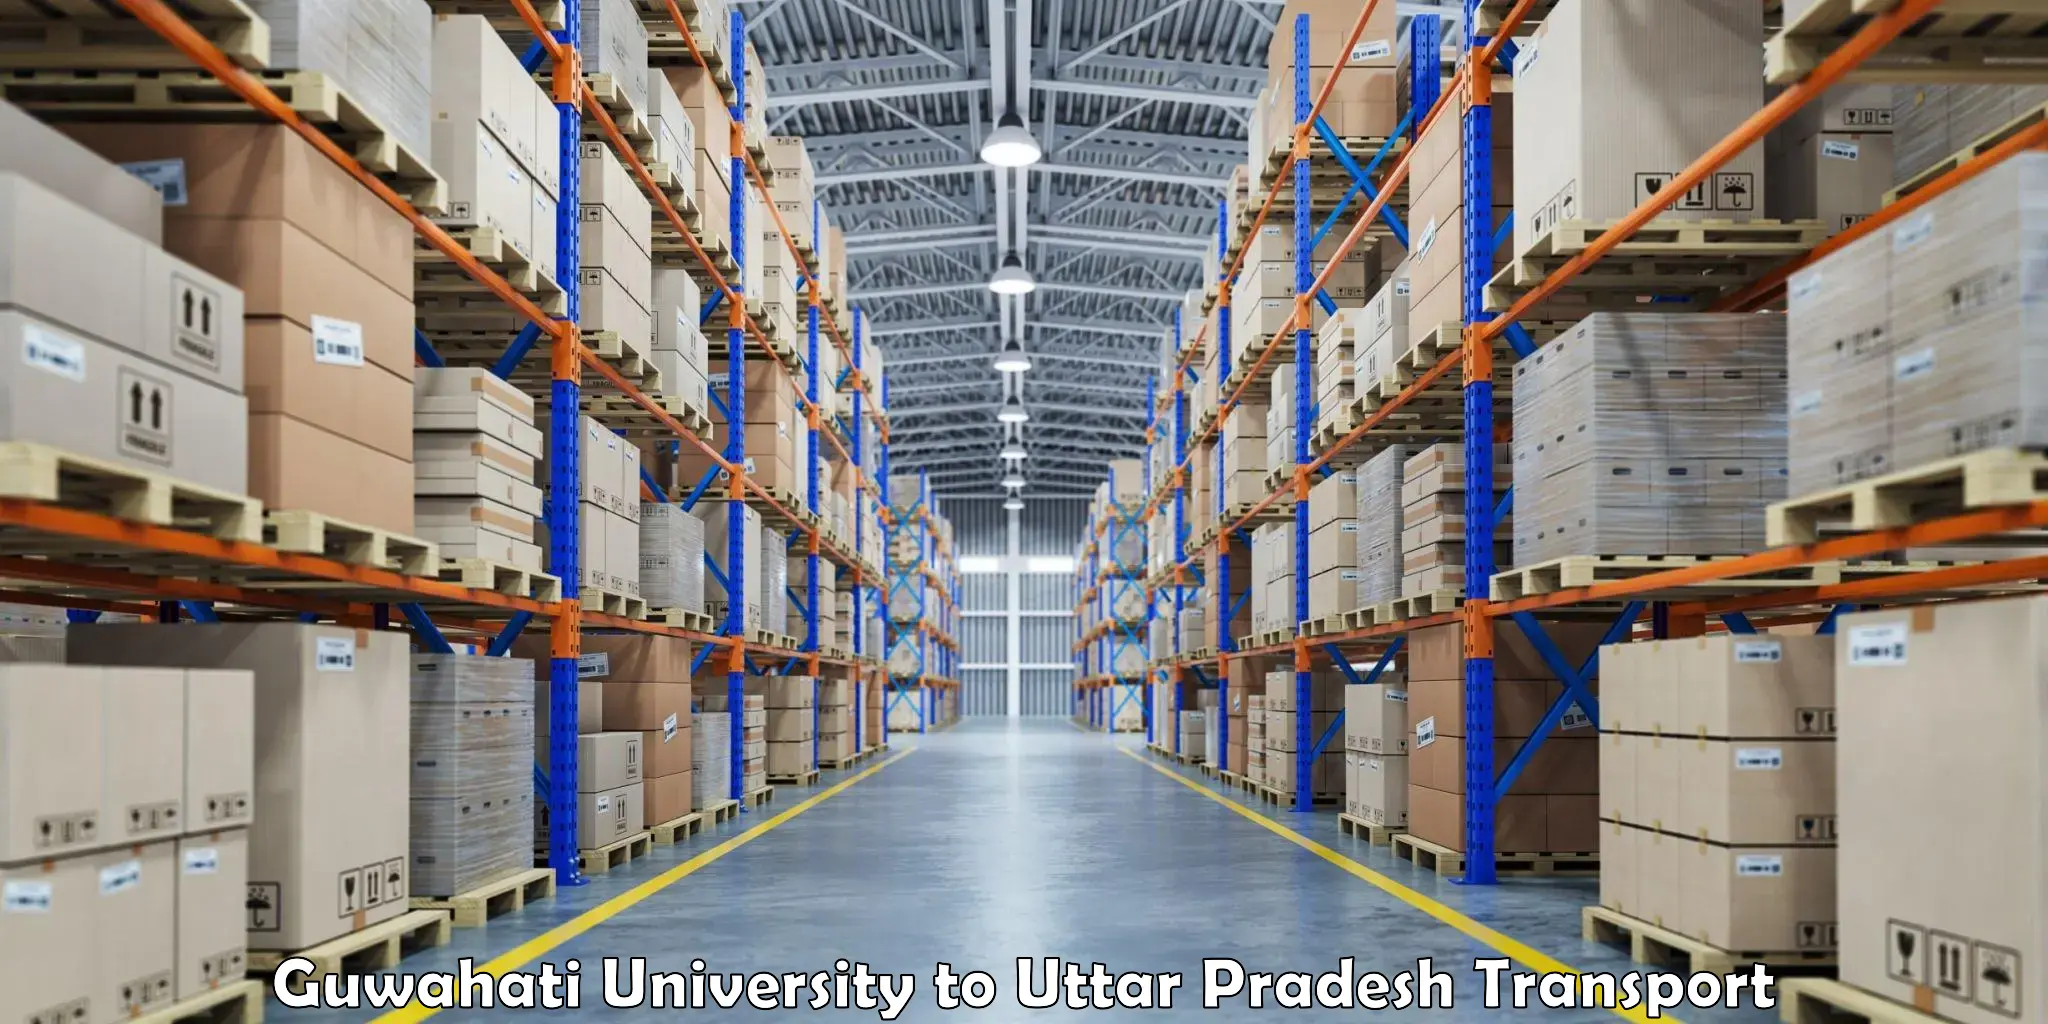 Road transport online services Guwahati University to Ayodhya